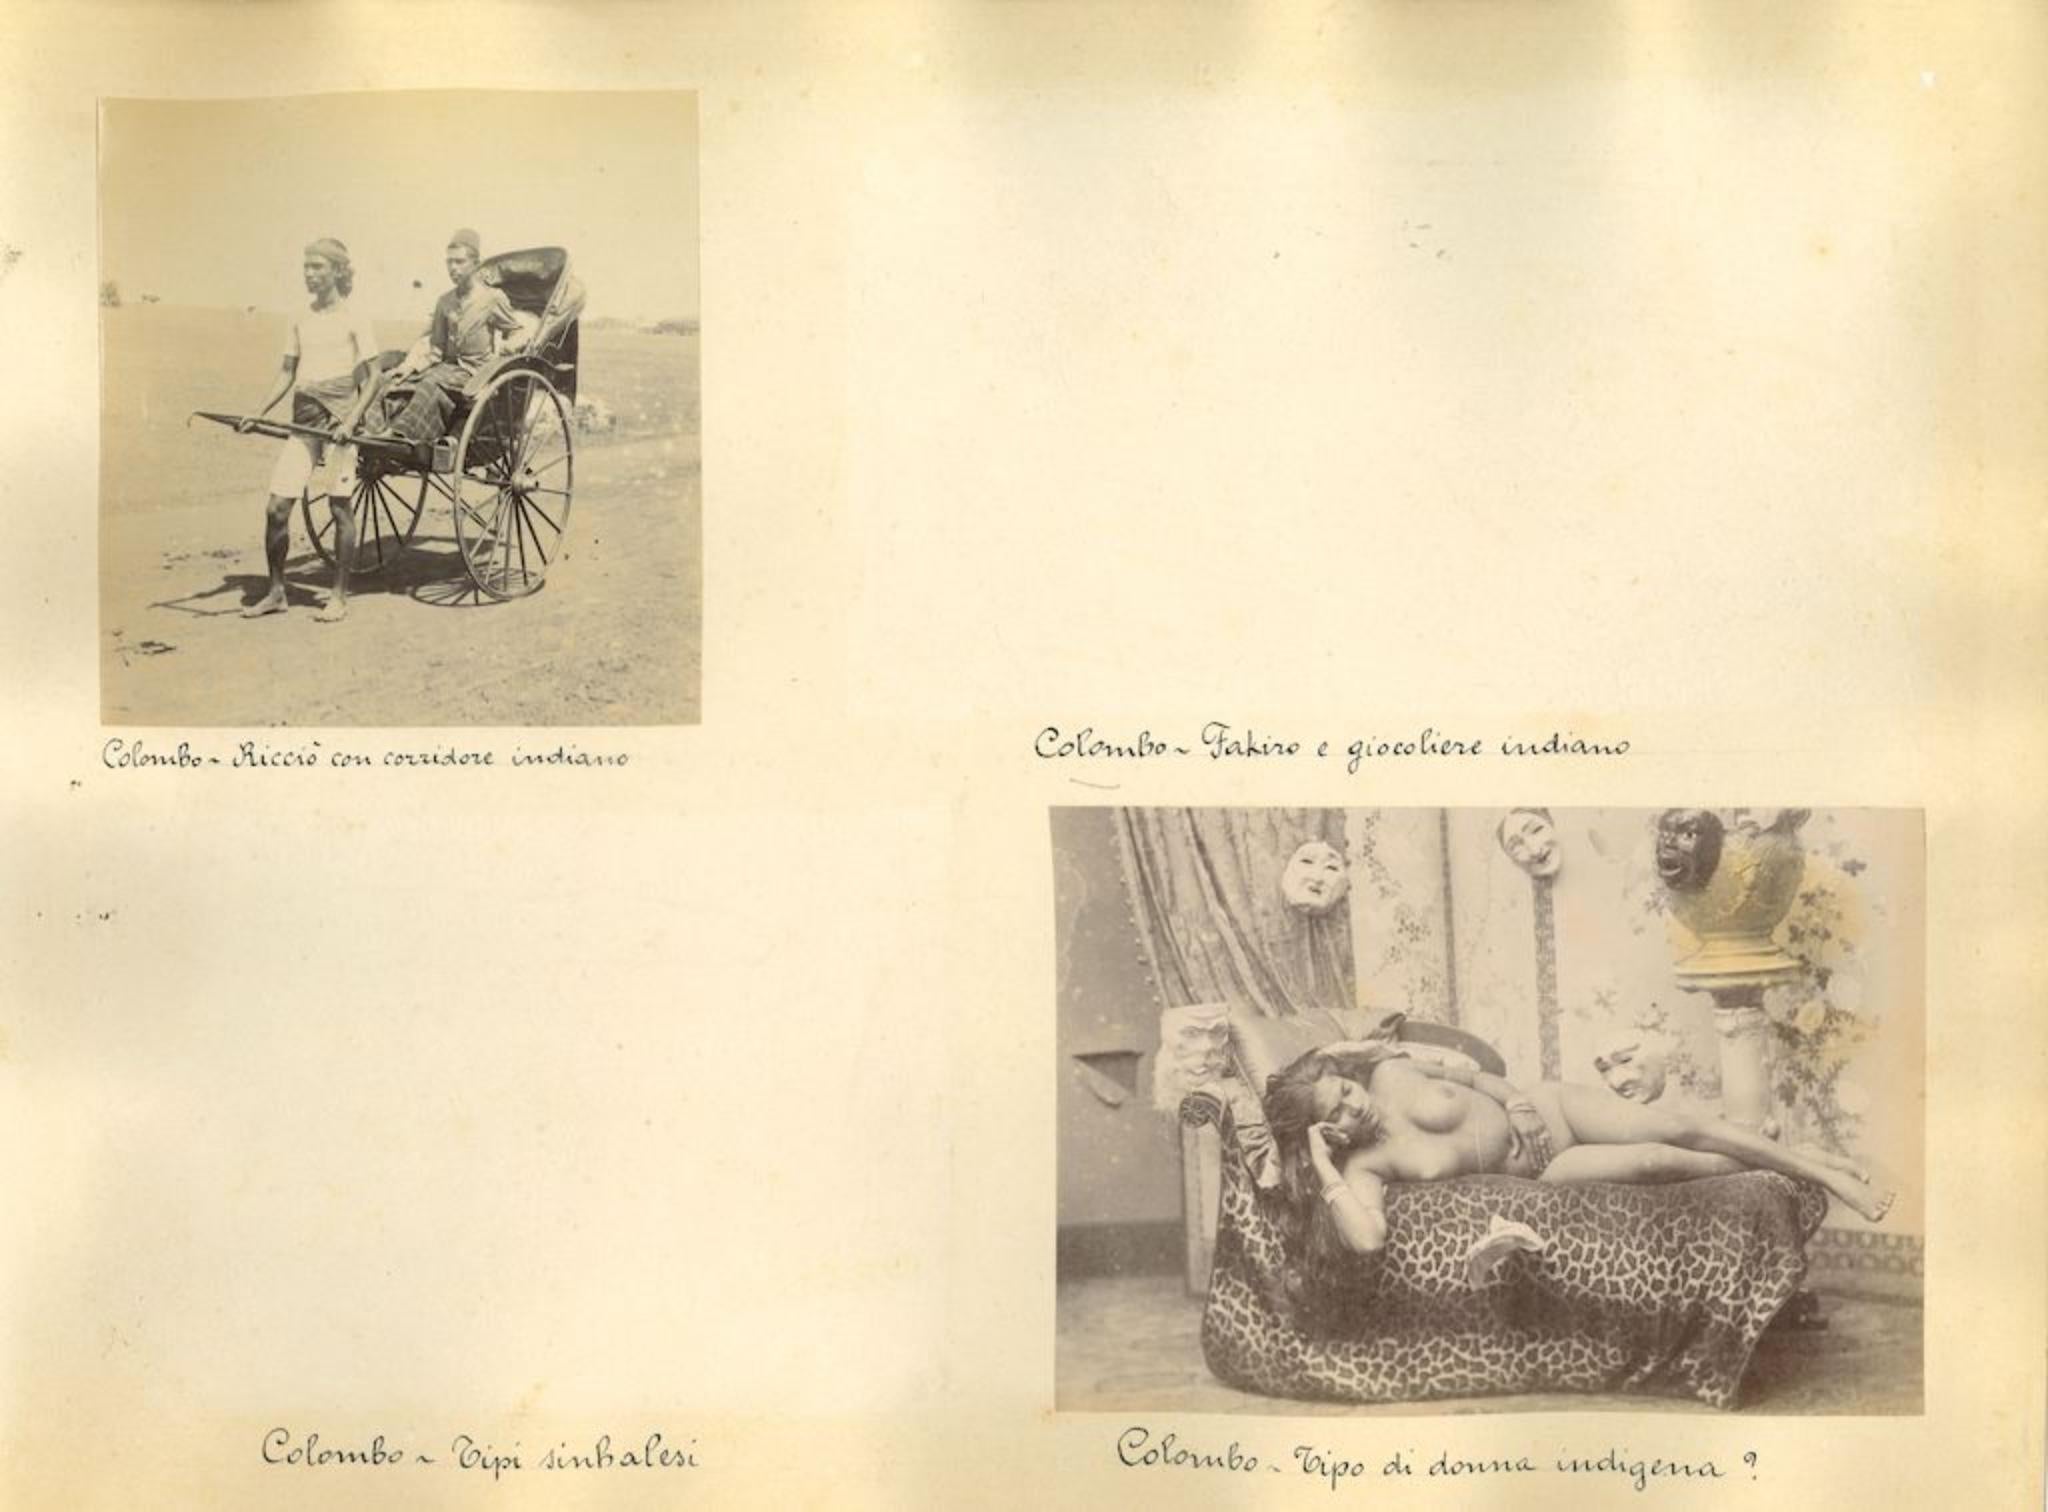 Ethnographic Photos from Colombo Sri Lanka - Original Albumen Prints - 1890s - Photograph by Unknown